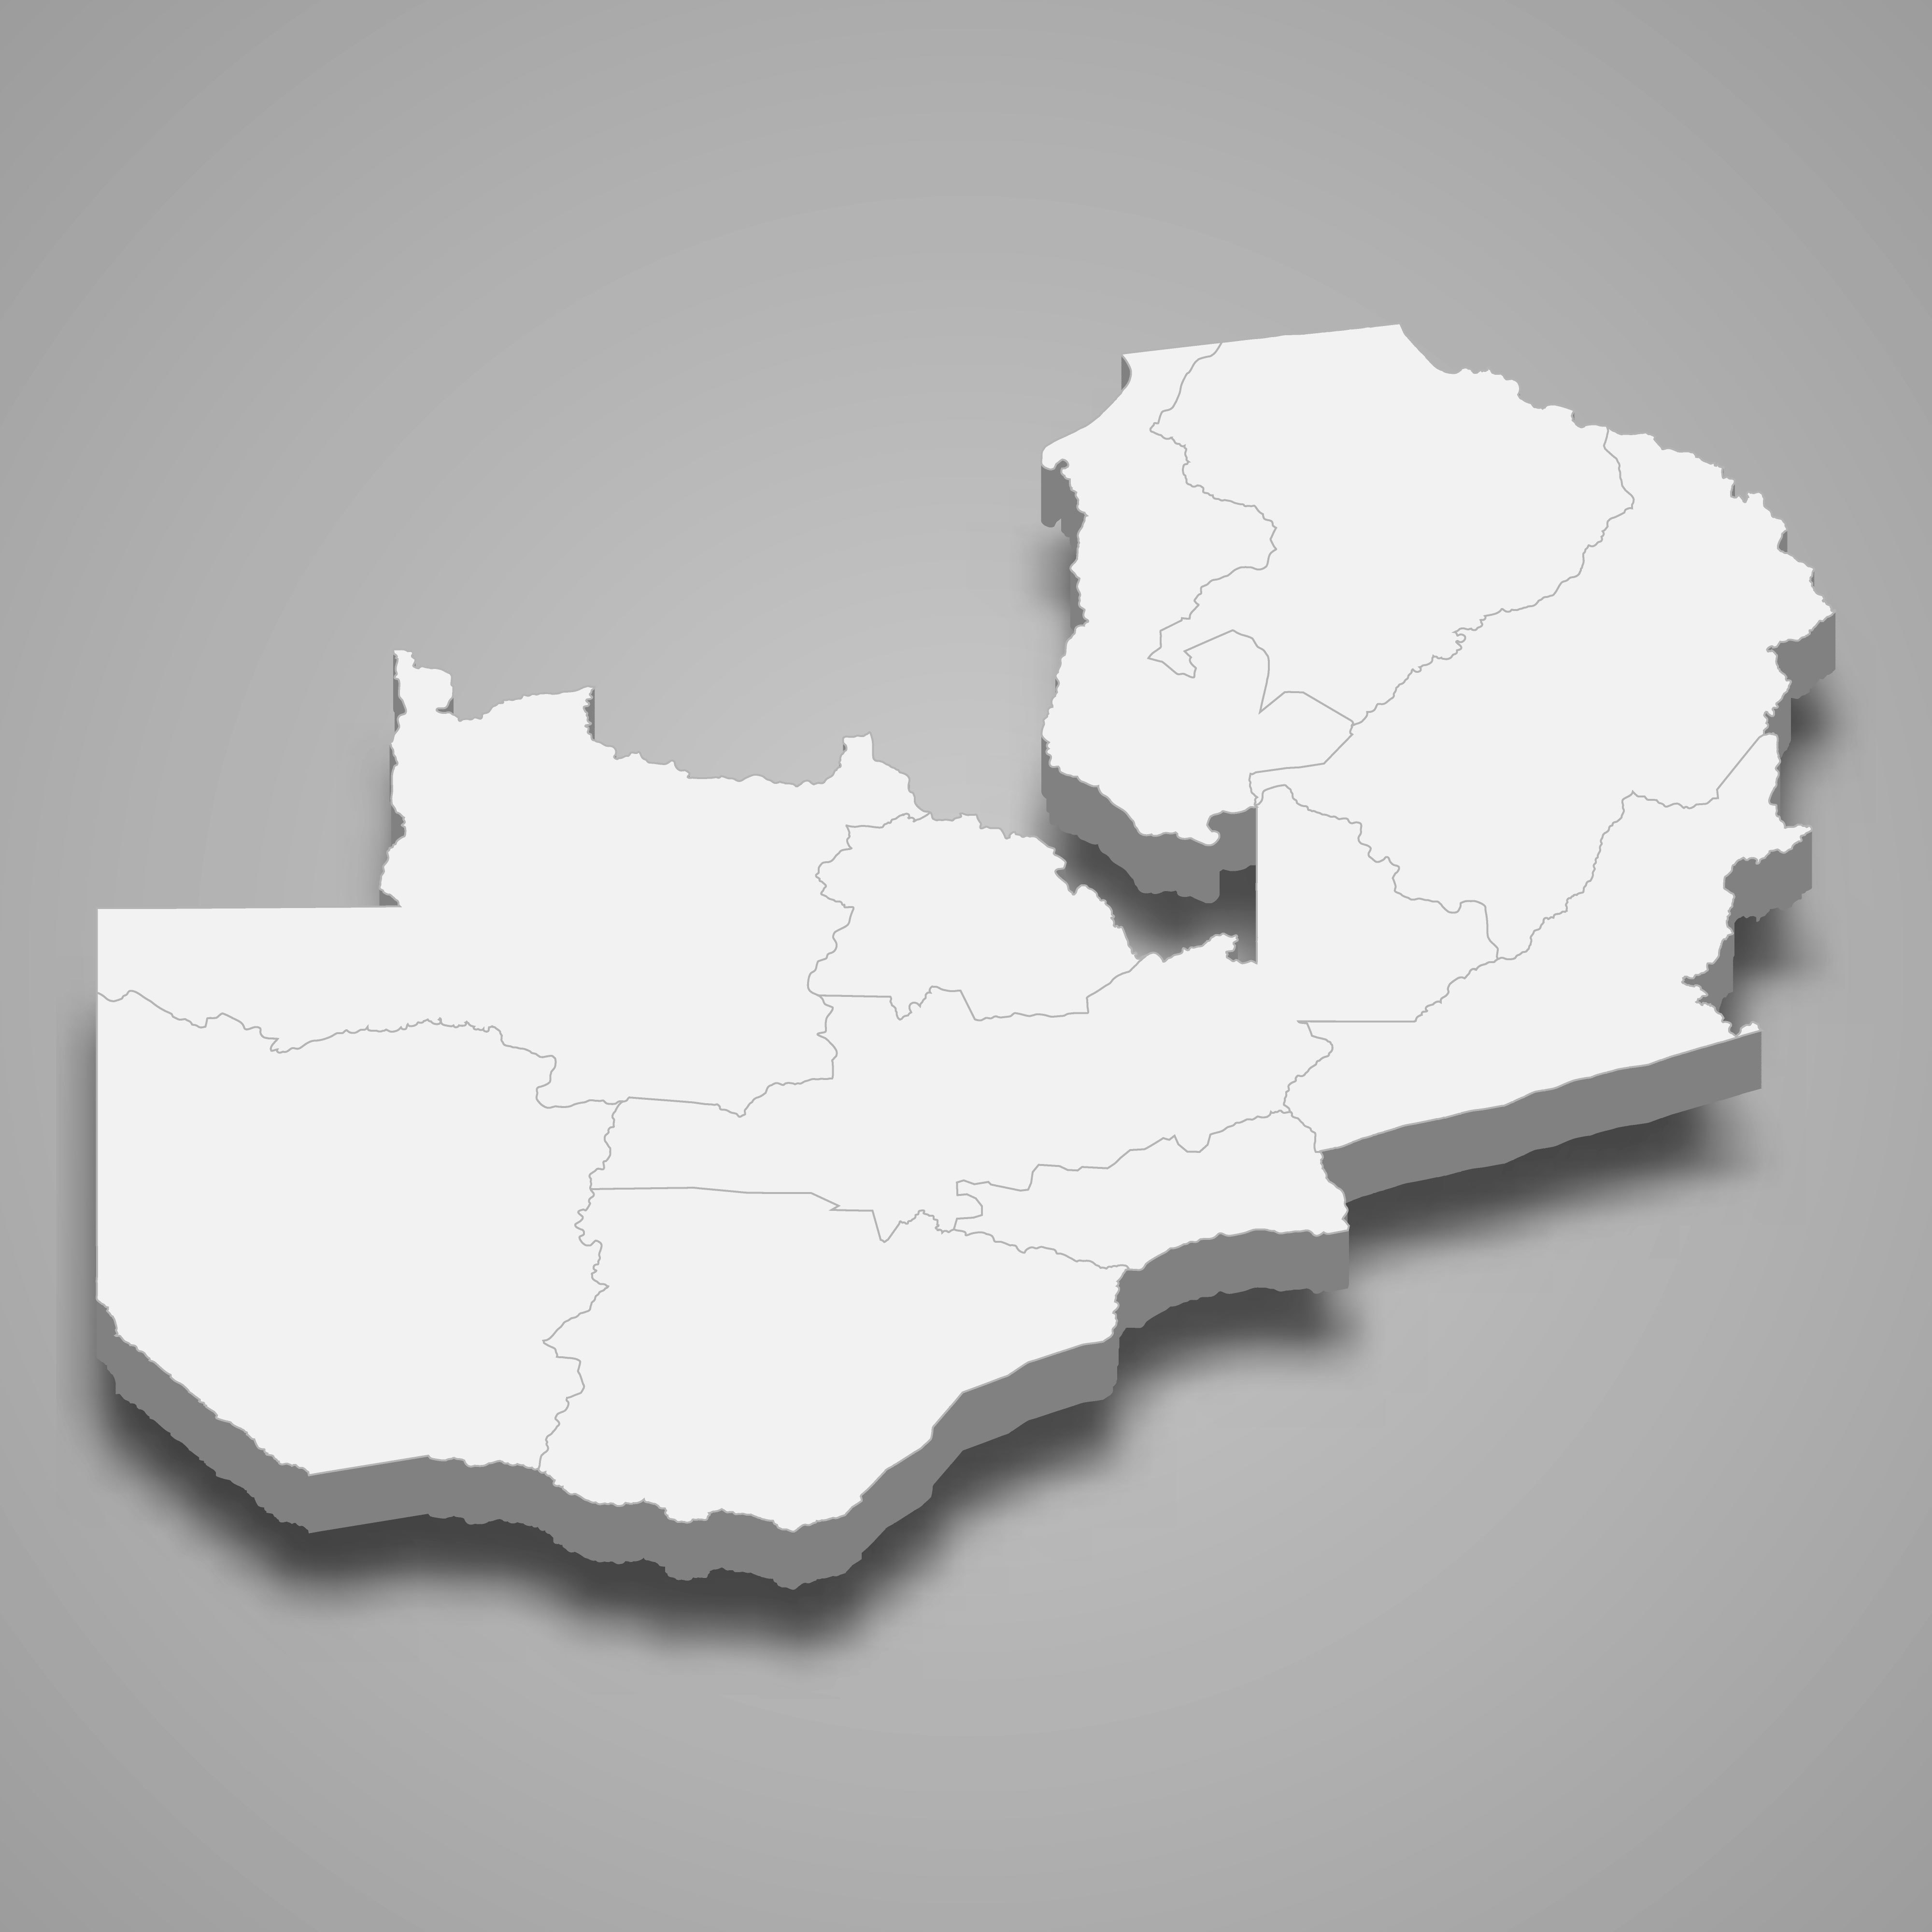 3d map of Zambia with borders of regions. 3d map with borders of regions Template for your design